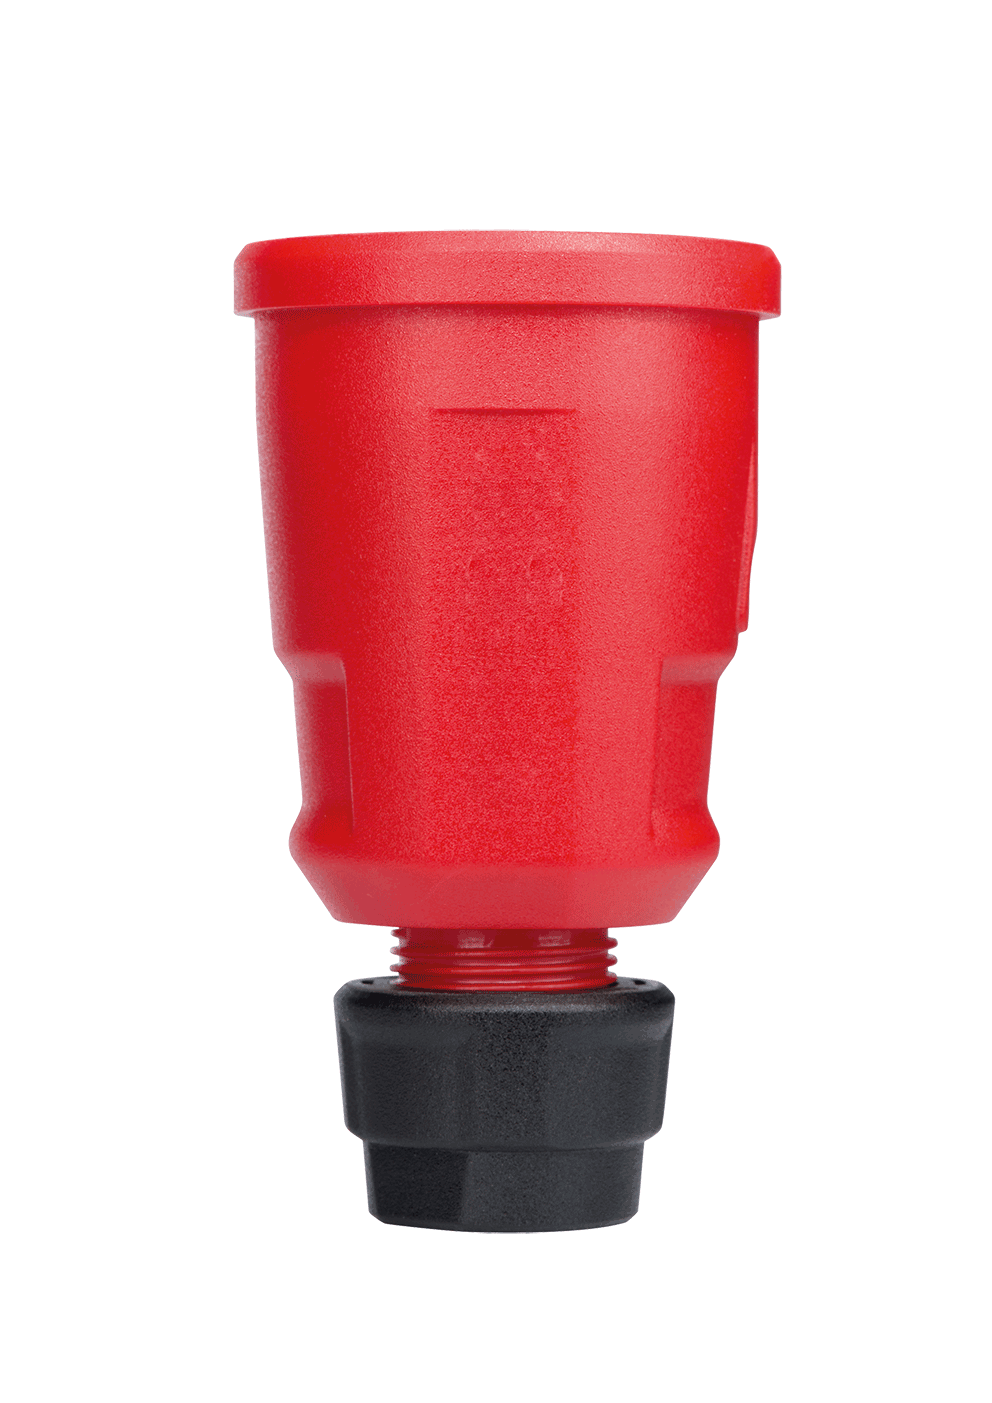 SCHUKO connector, red, Elamid high performance plastic, with improved accidental-contact guard